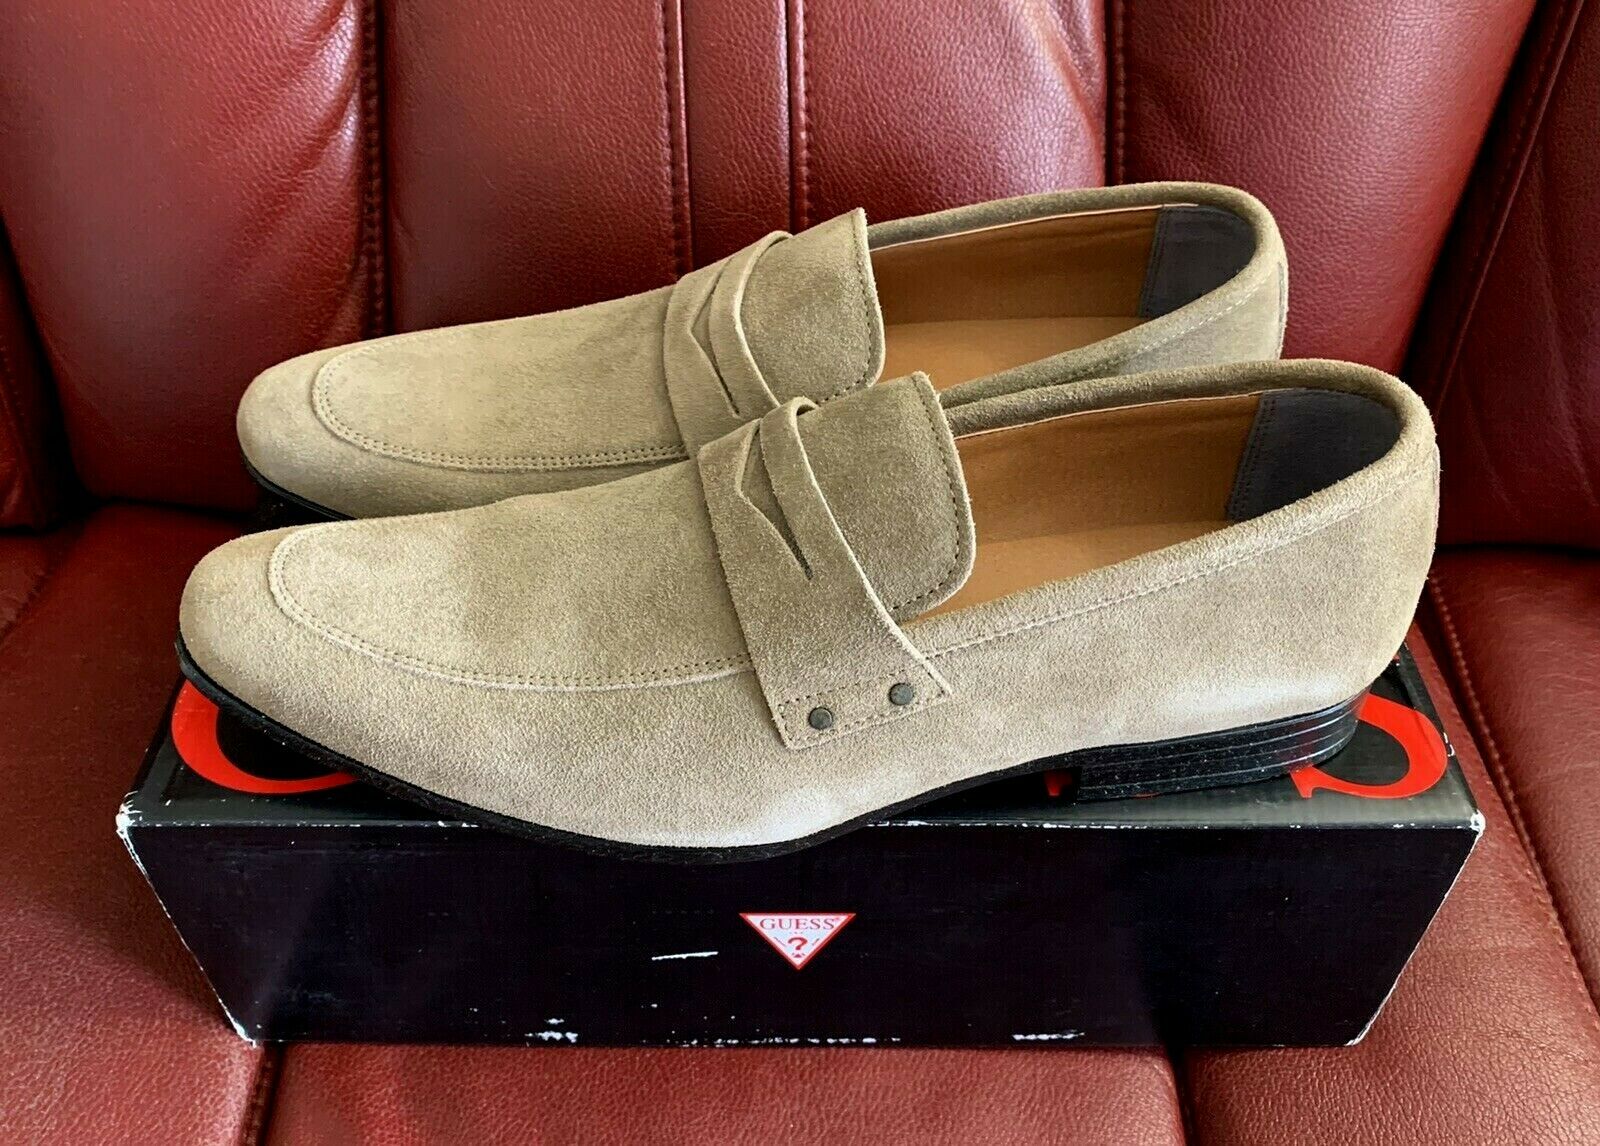 GUESS GRANTFORD Men's Casual Shoes Size 11.5 Light Brown Suede Upper Leather NEW